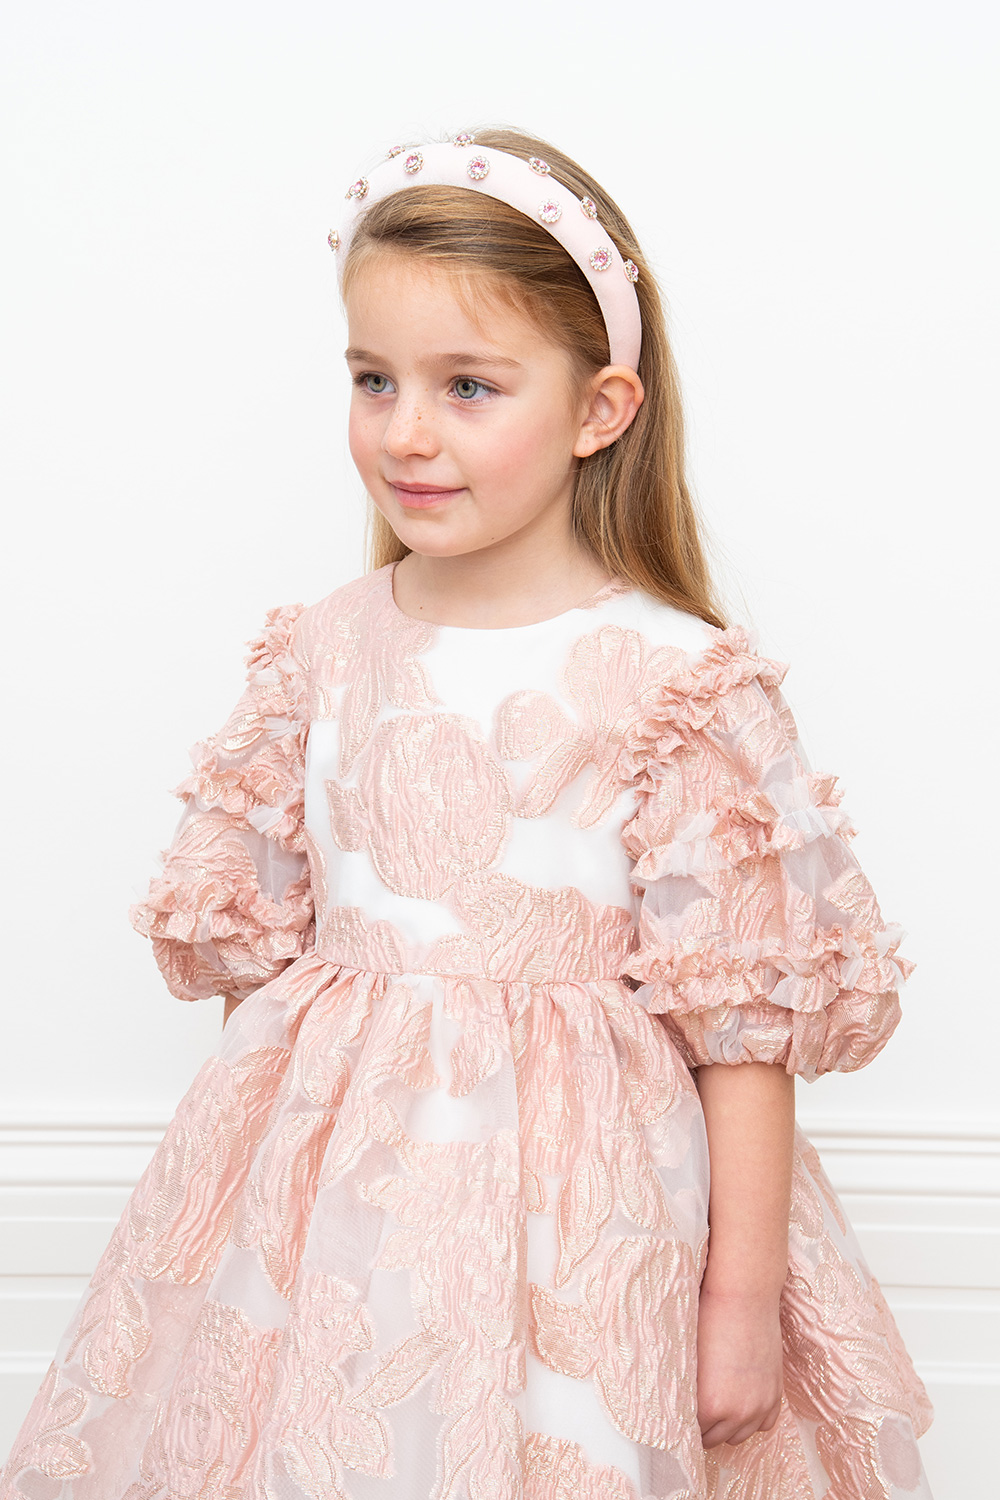 2023 Sequin Puff Sleeve Girls Glitter Evening Dress For Kids Perfect For  Weddings, Birthdays, Baptisms, And Eid From Kukuson, $40.01 | DHgate.Com